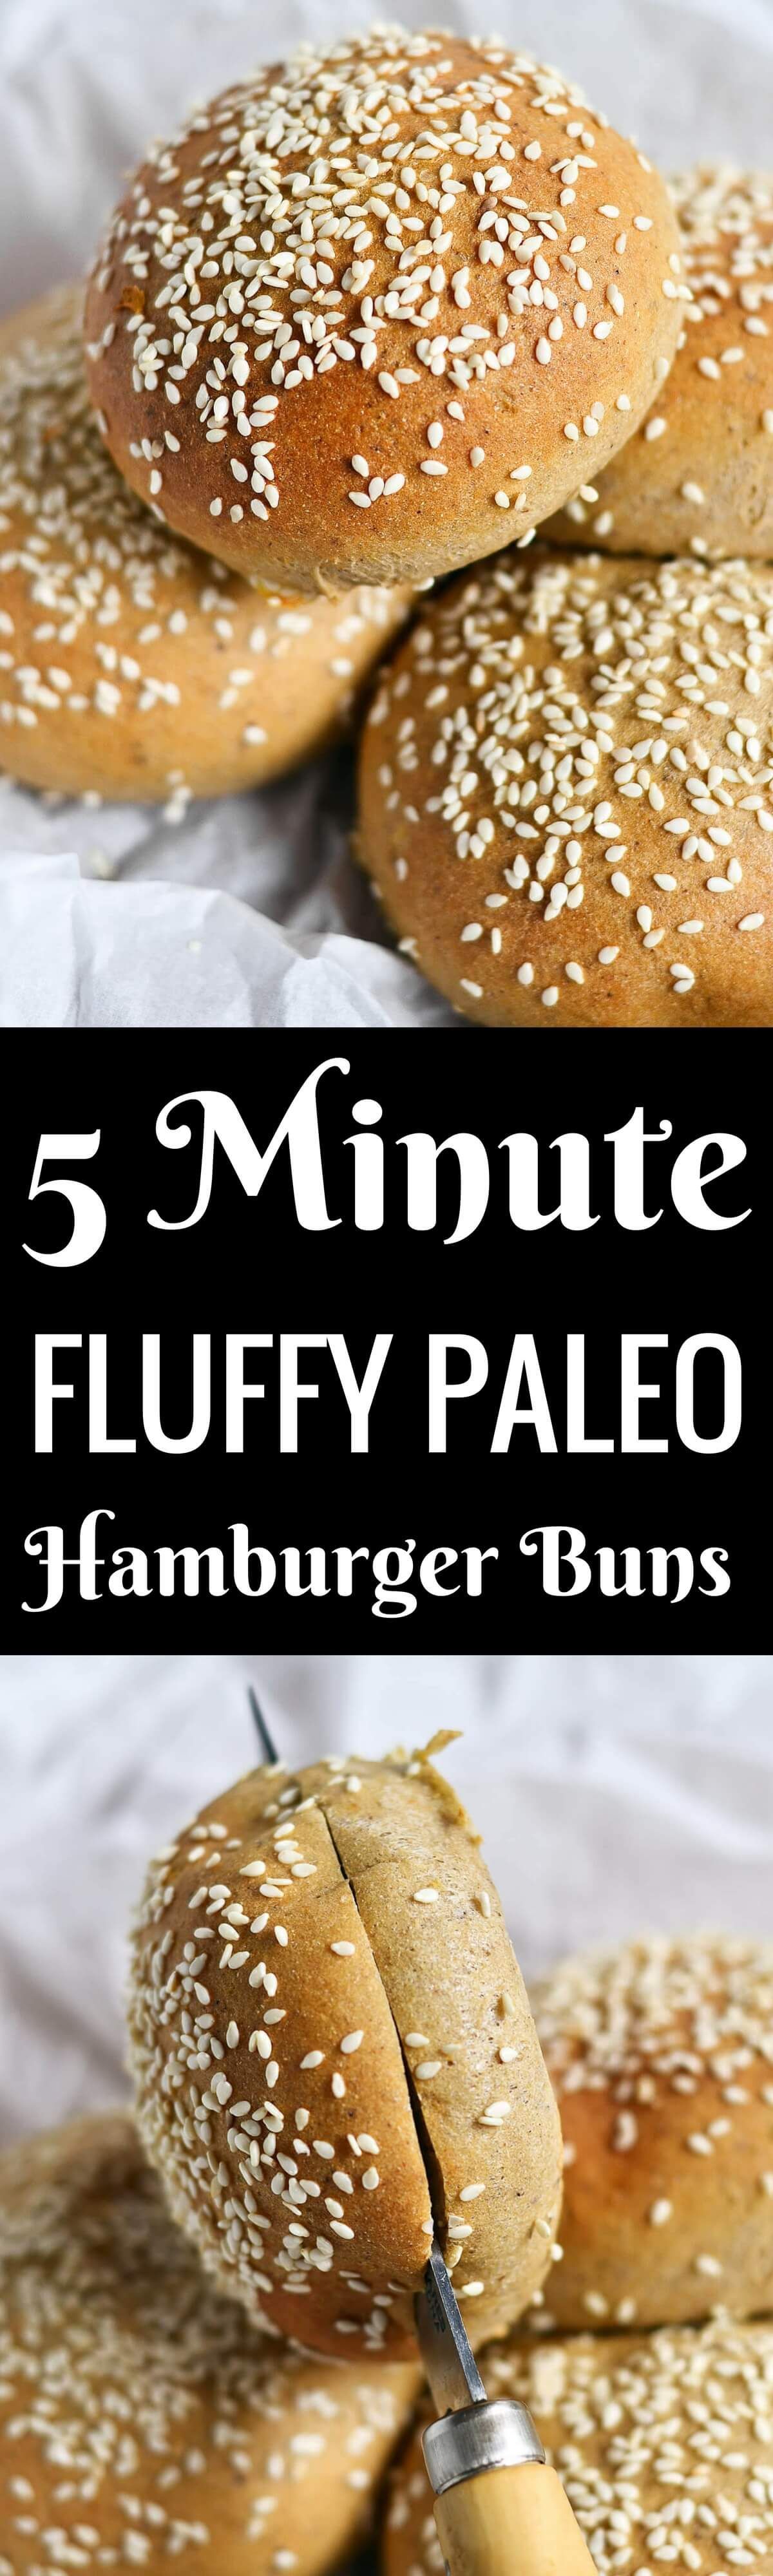 Extra fluffy and easy to make paleo hamburger buns will leave you in awe! Grain free. Paleo. Yeast free. Nut free. Ready in 5